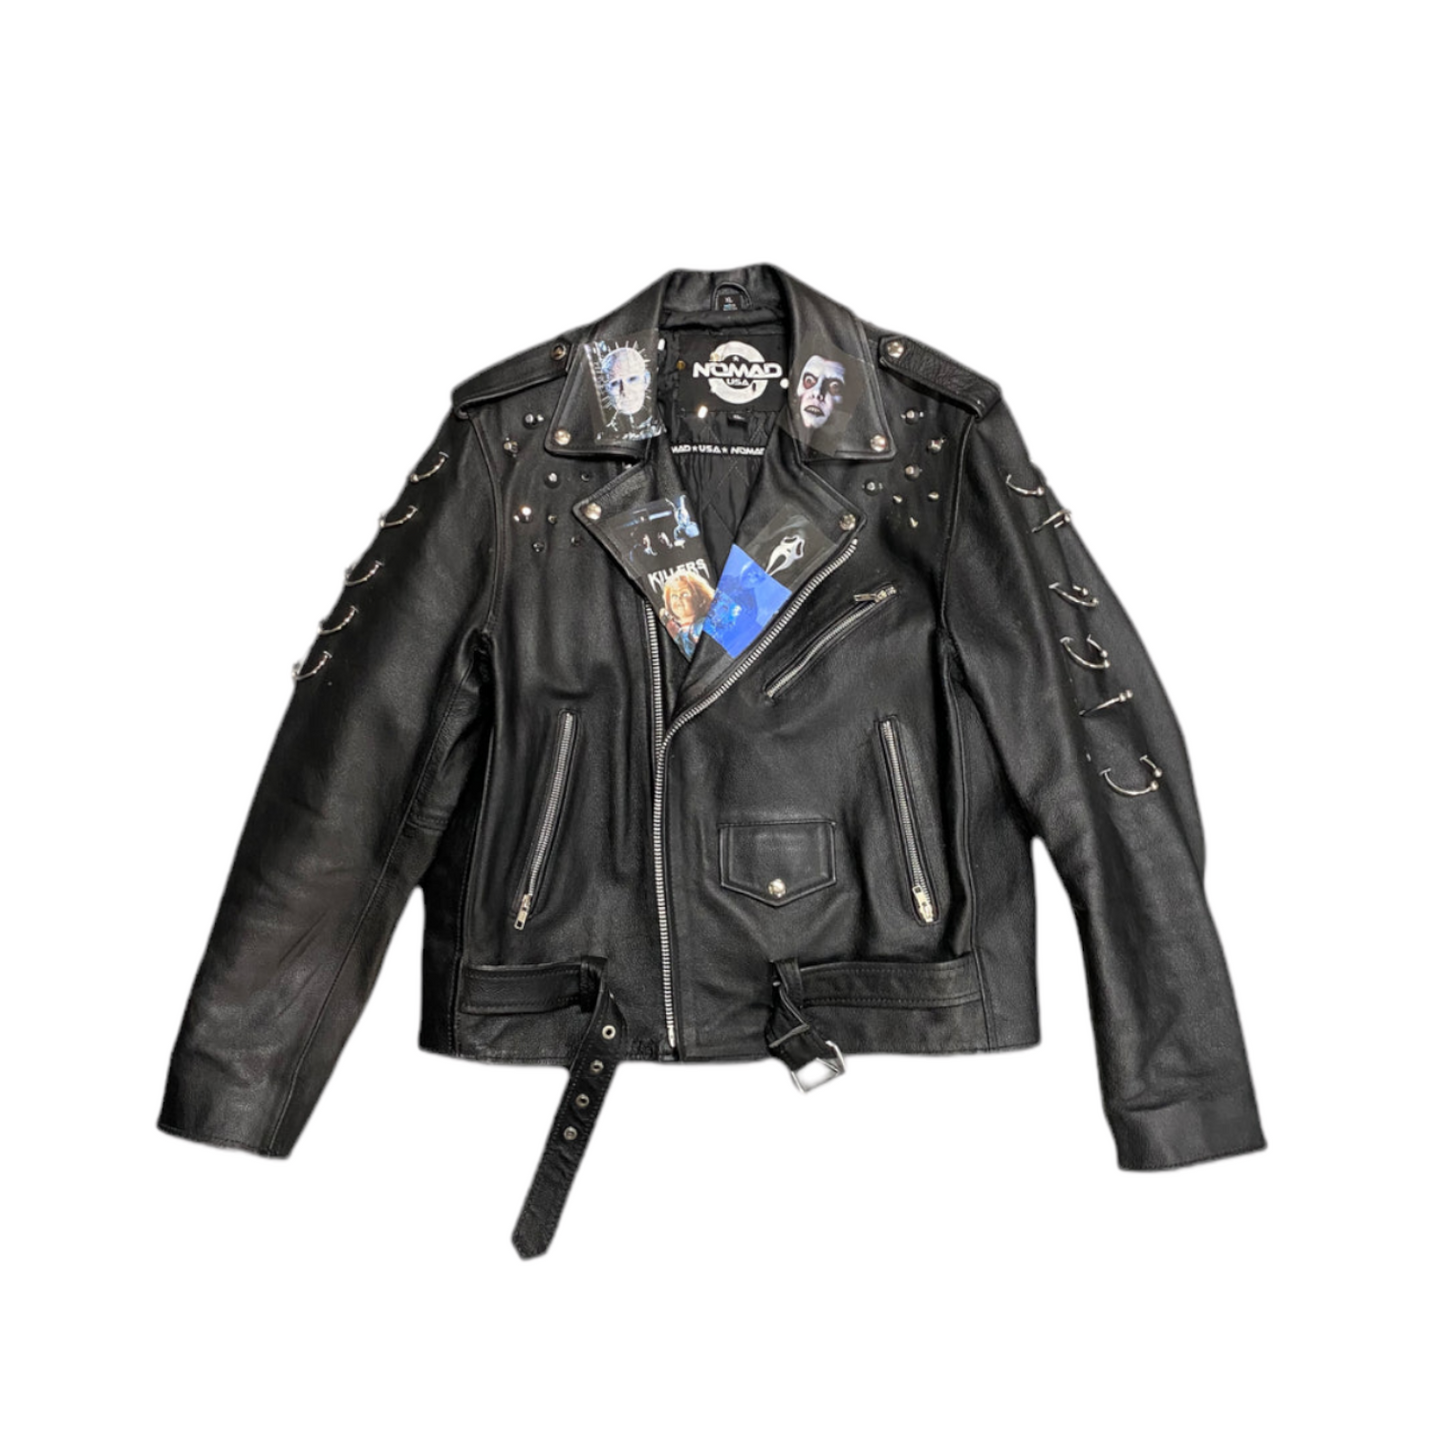 Toth 660 Leather jacket